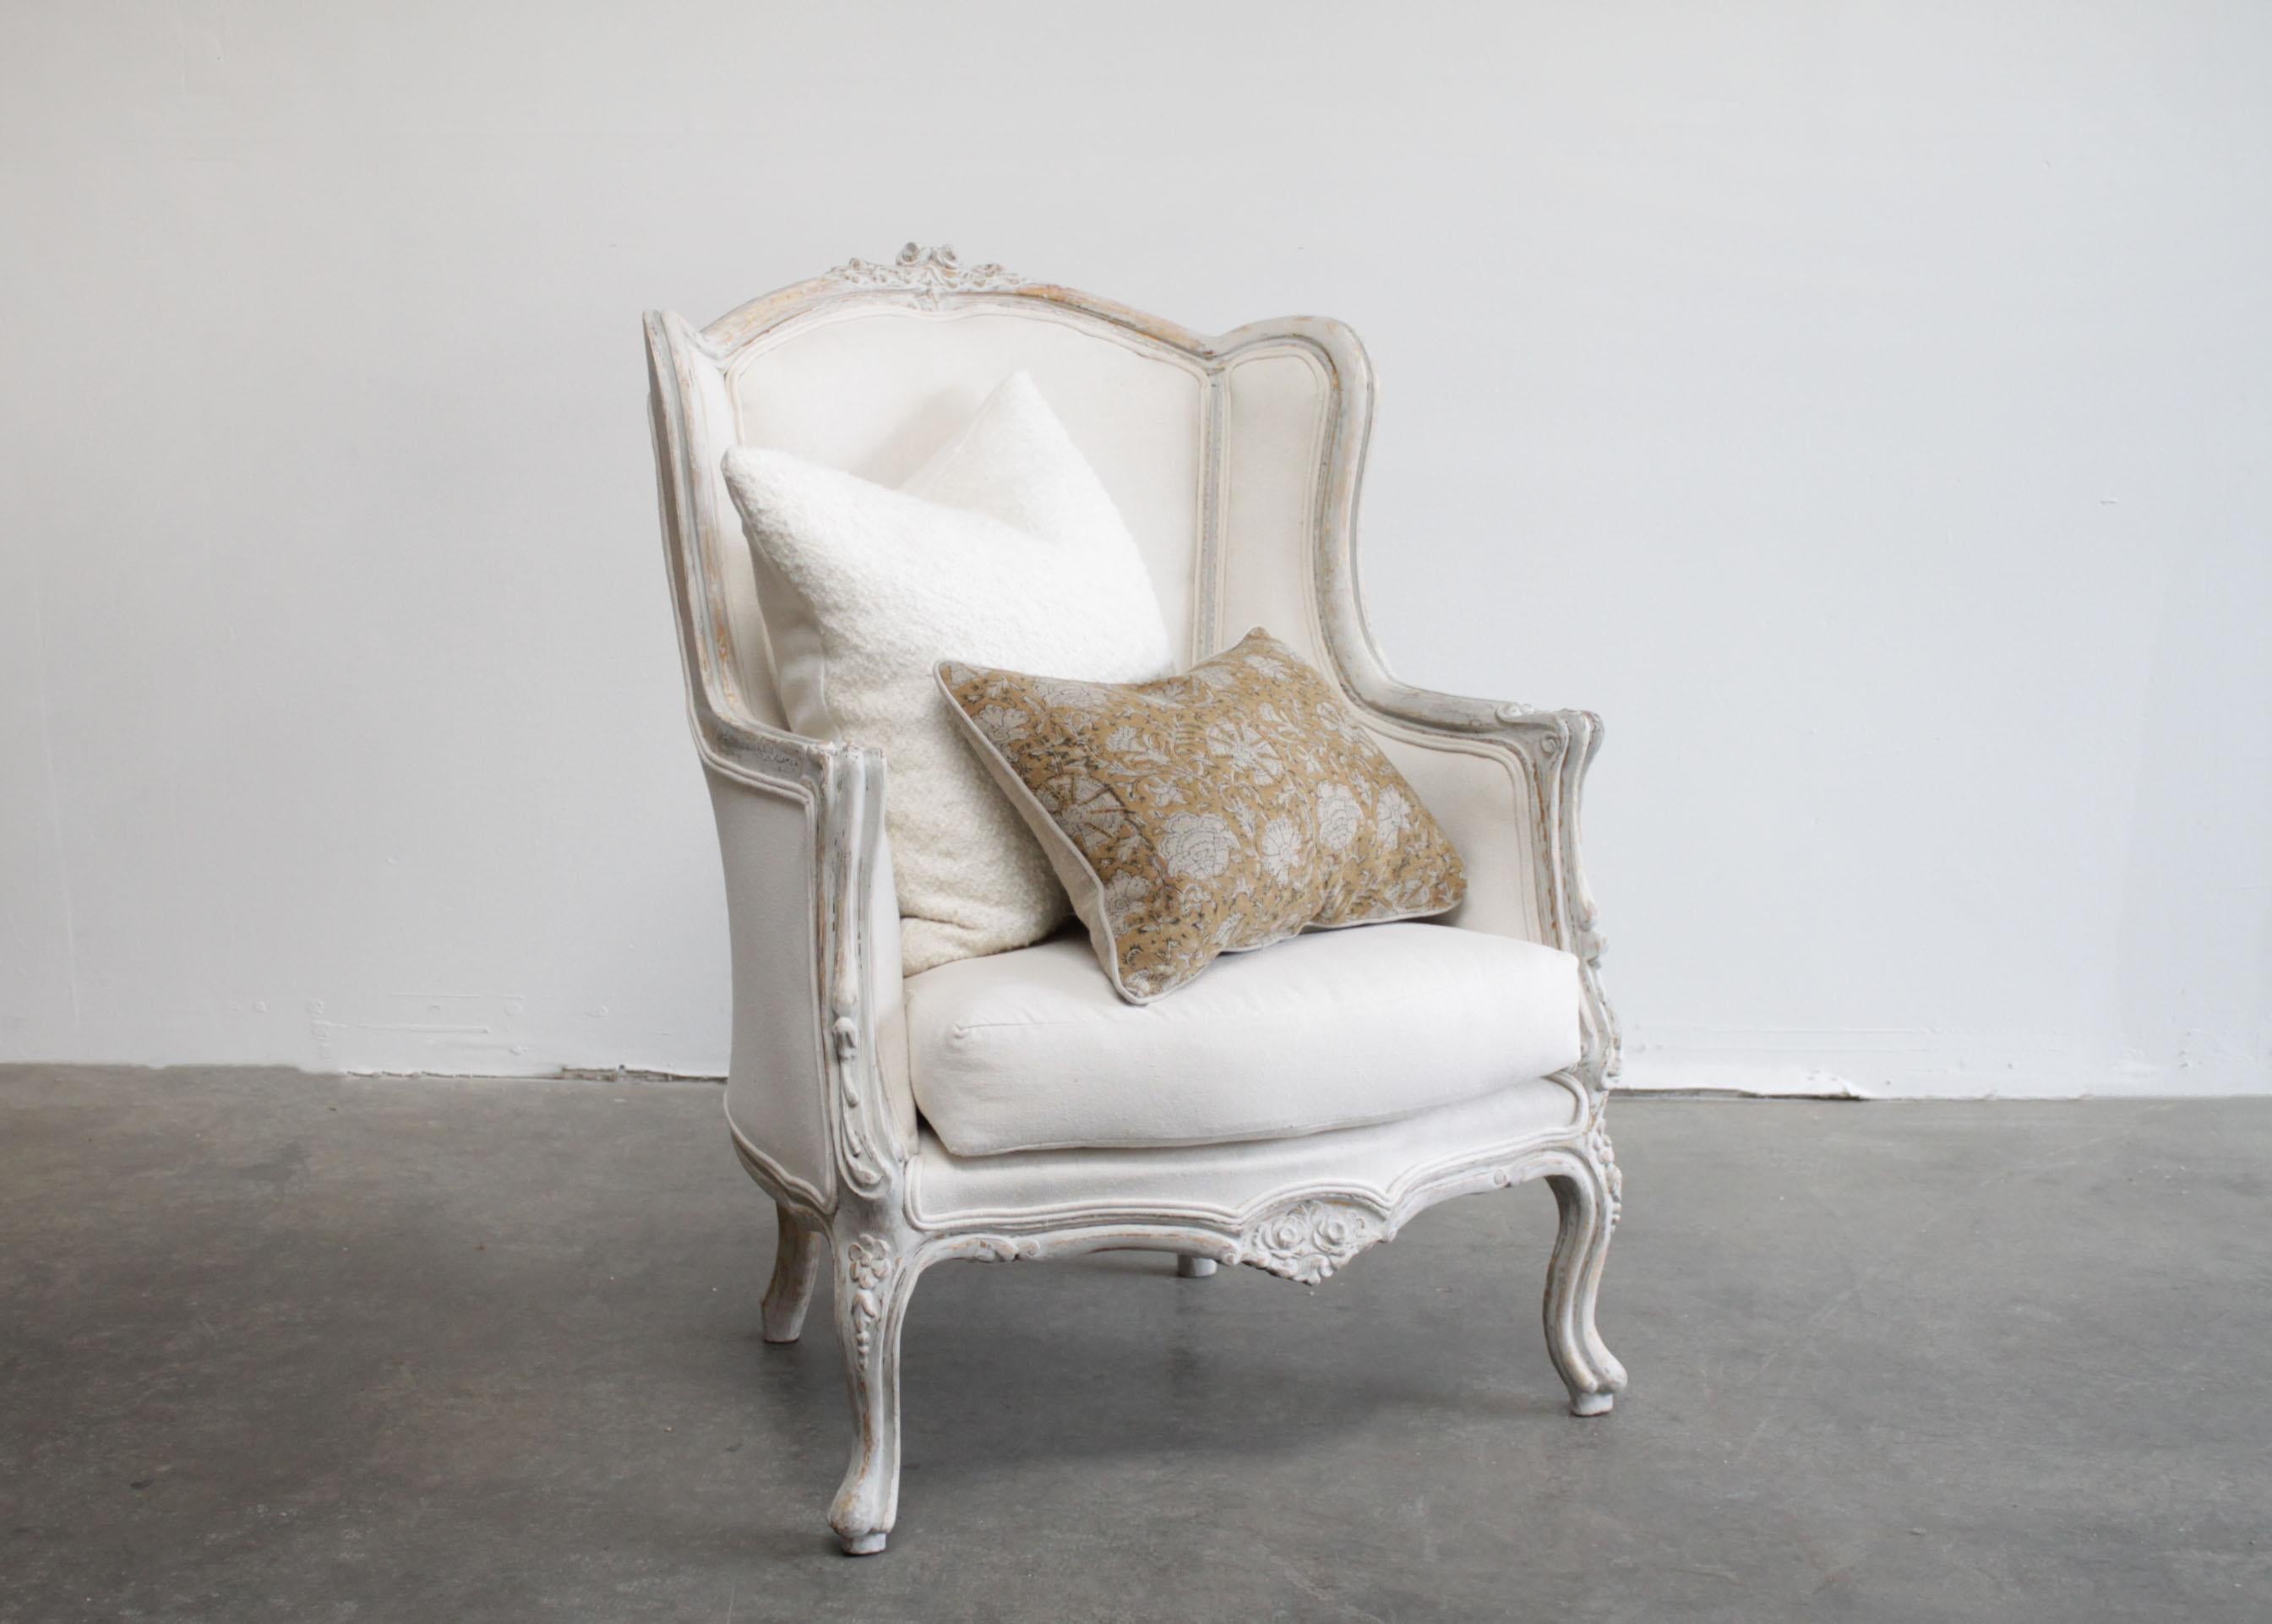 Pair of painted French style wing back bergere chairs
Vintage wing backs have been painted in a soft oyster white with distressed edges, and gilt peeking through.
Upholstered in a canvas duck cloth and finished with a double welt trim. A standard